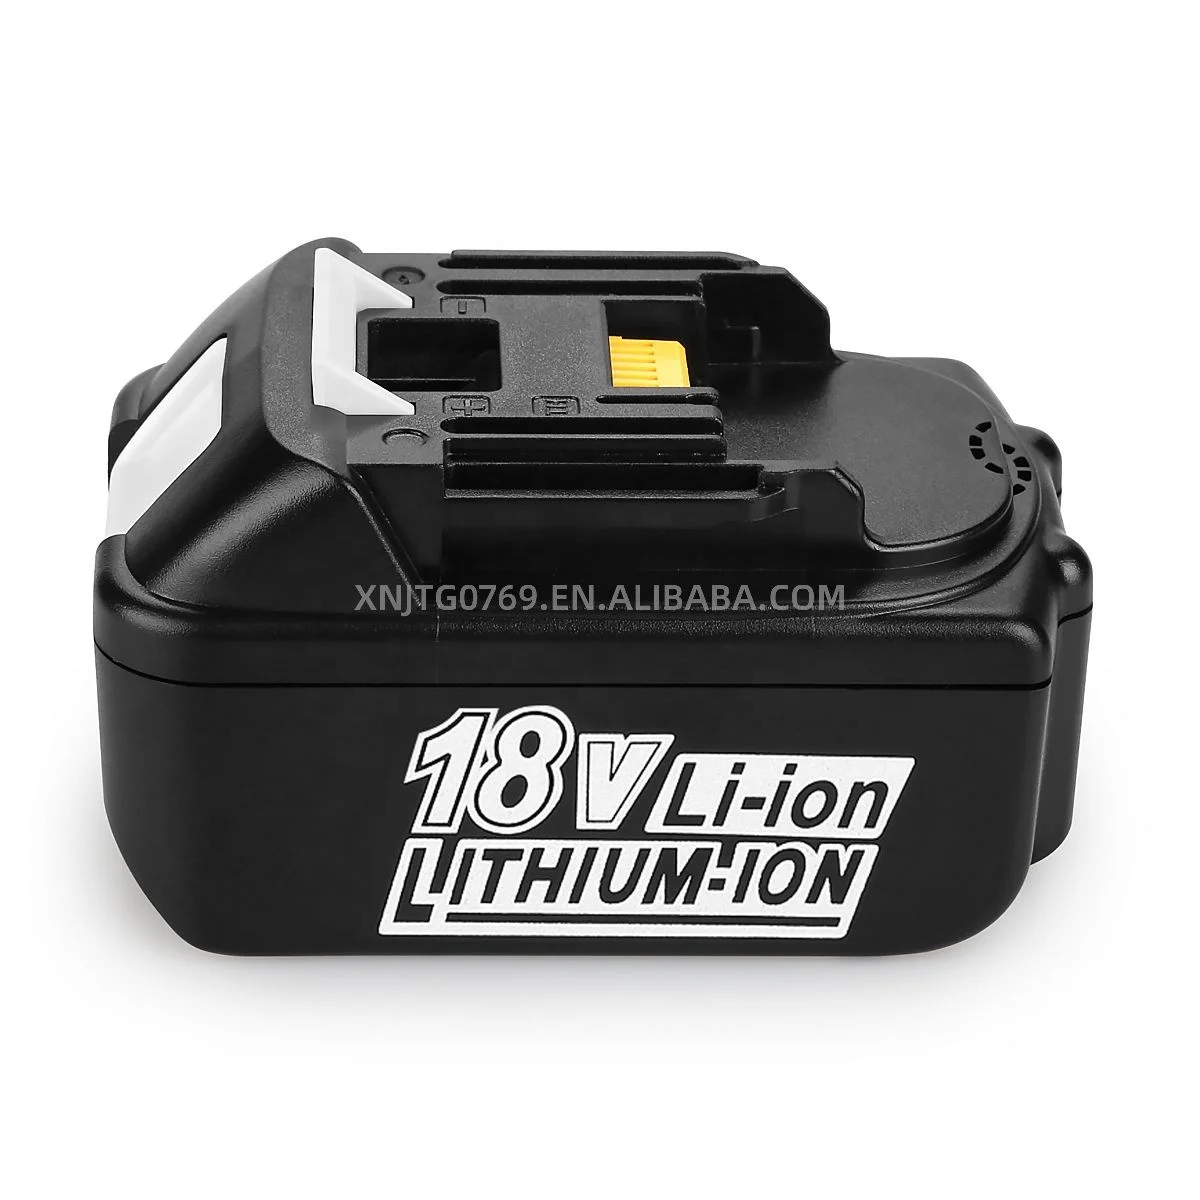 
C10 hot sale lithium 18v 6.0 ah replacement Makita power tool battery back for makita drill 